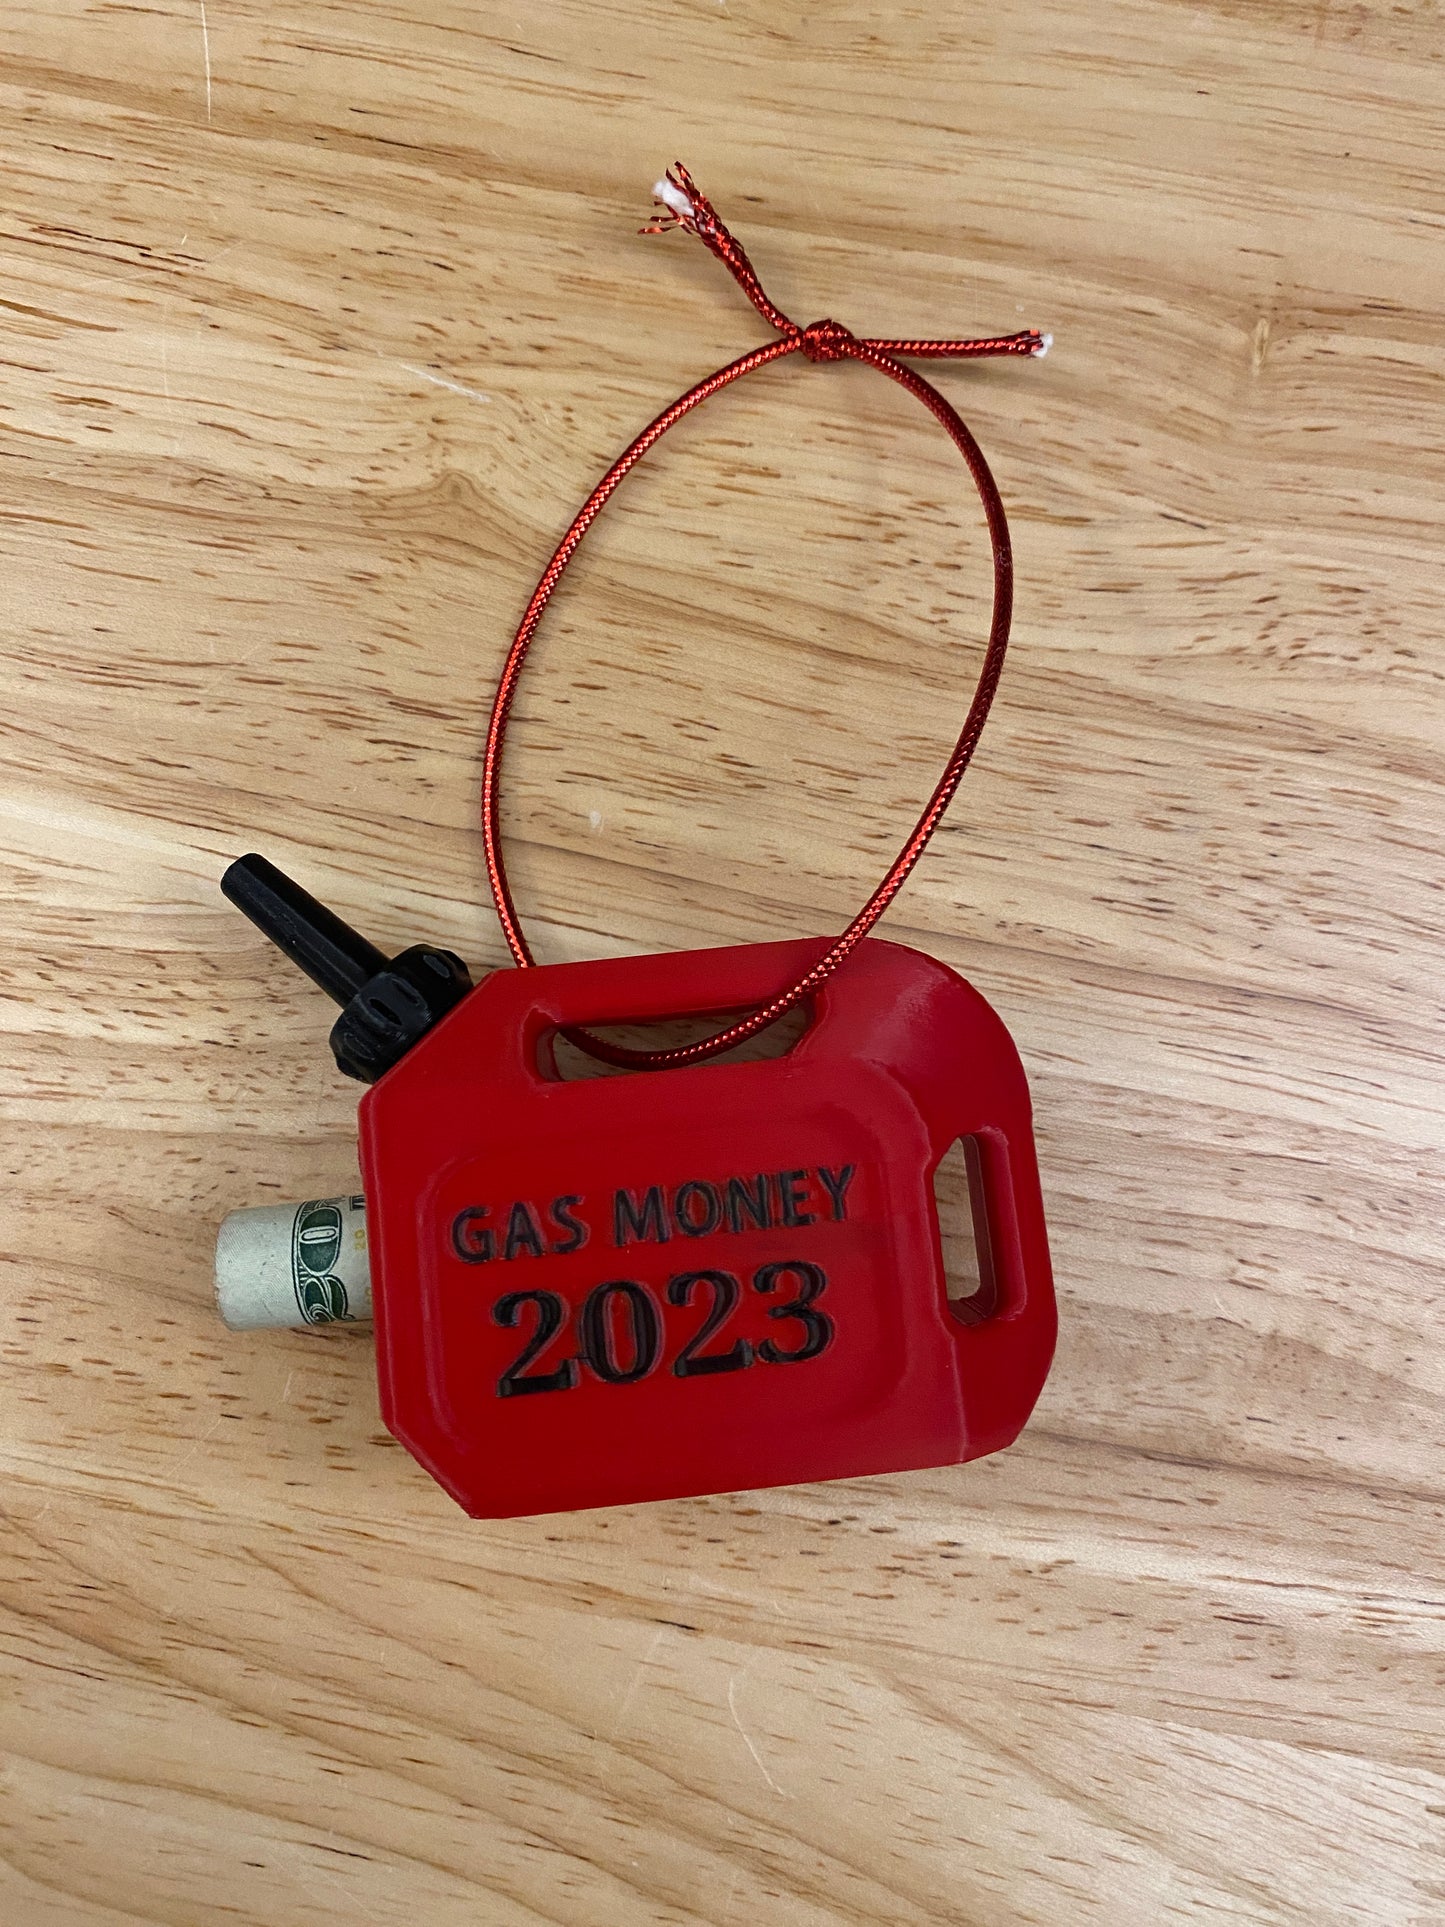 Colorful 2023 Gas Can Money Holder Ornament, money ornament, gas can ornament, gas money ornament, Money Holder ornament